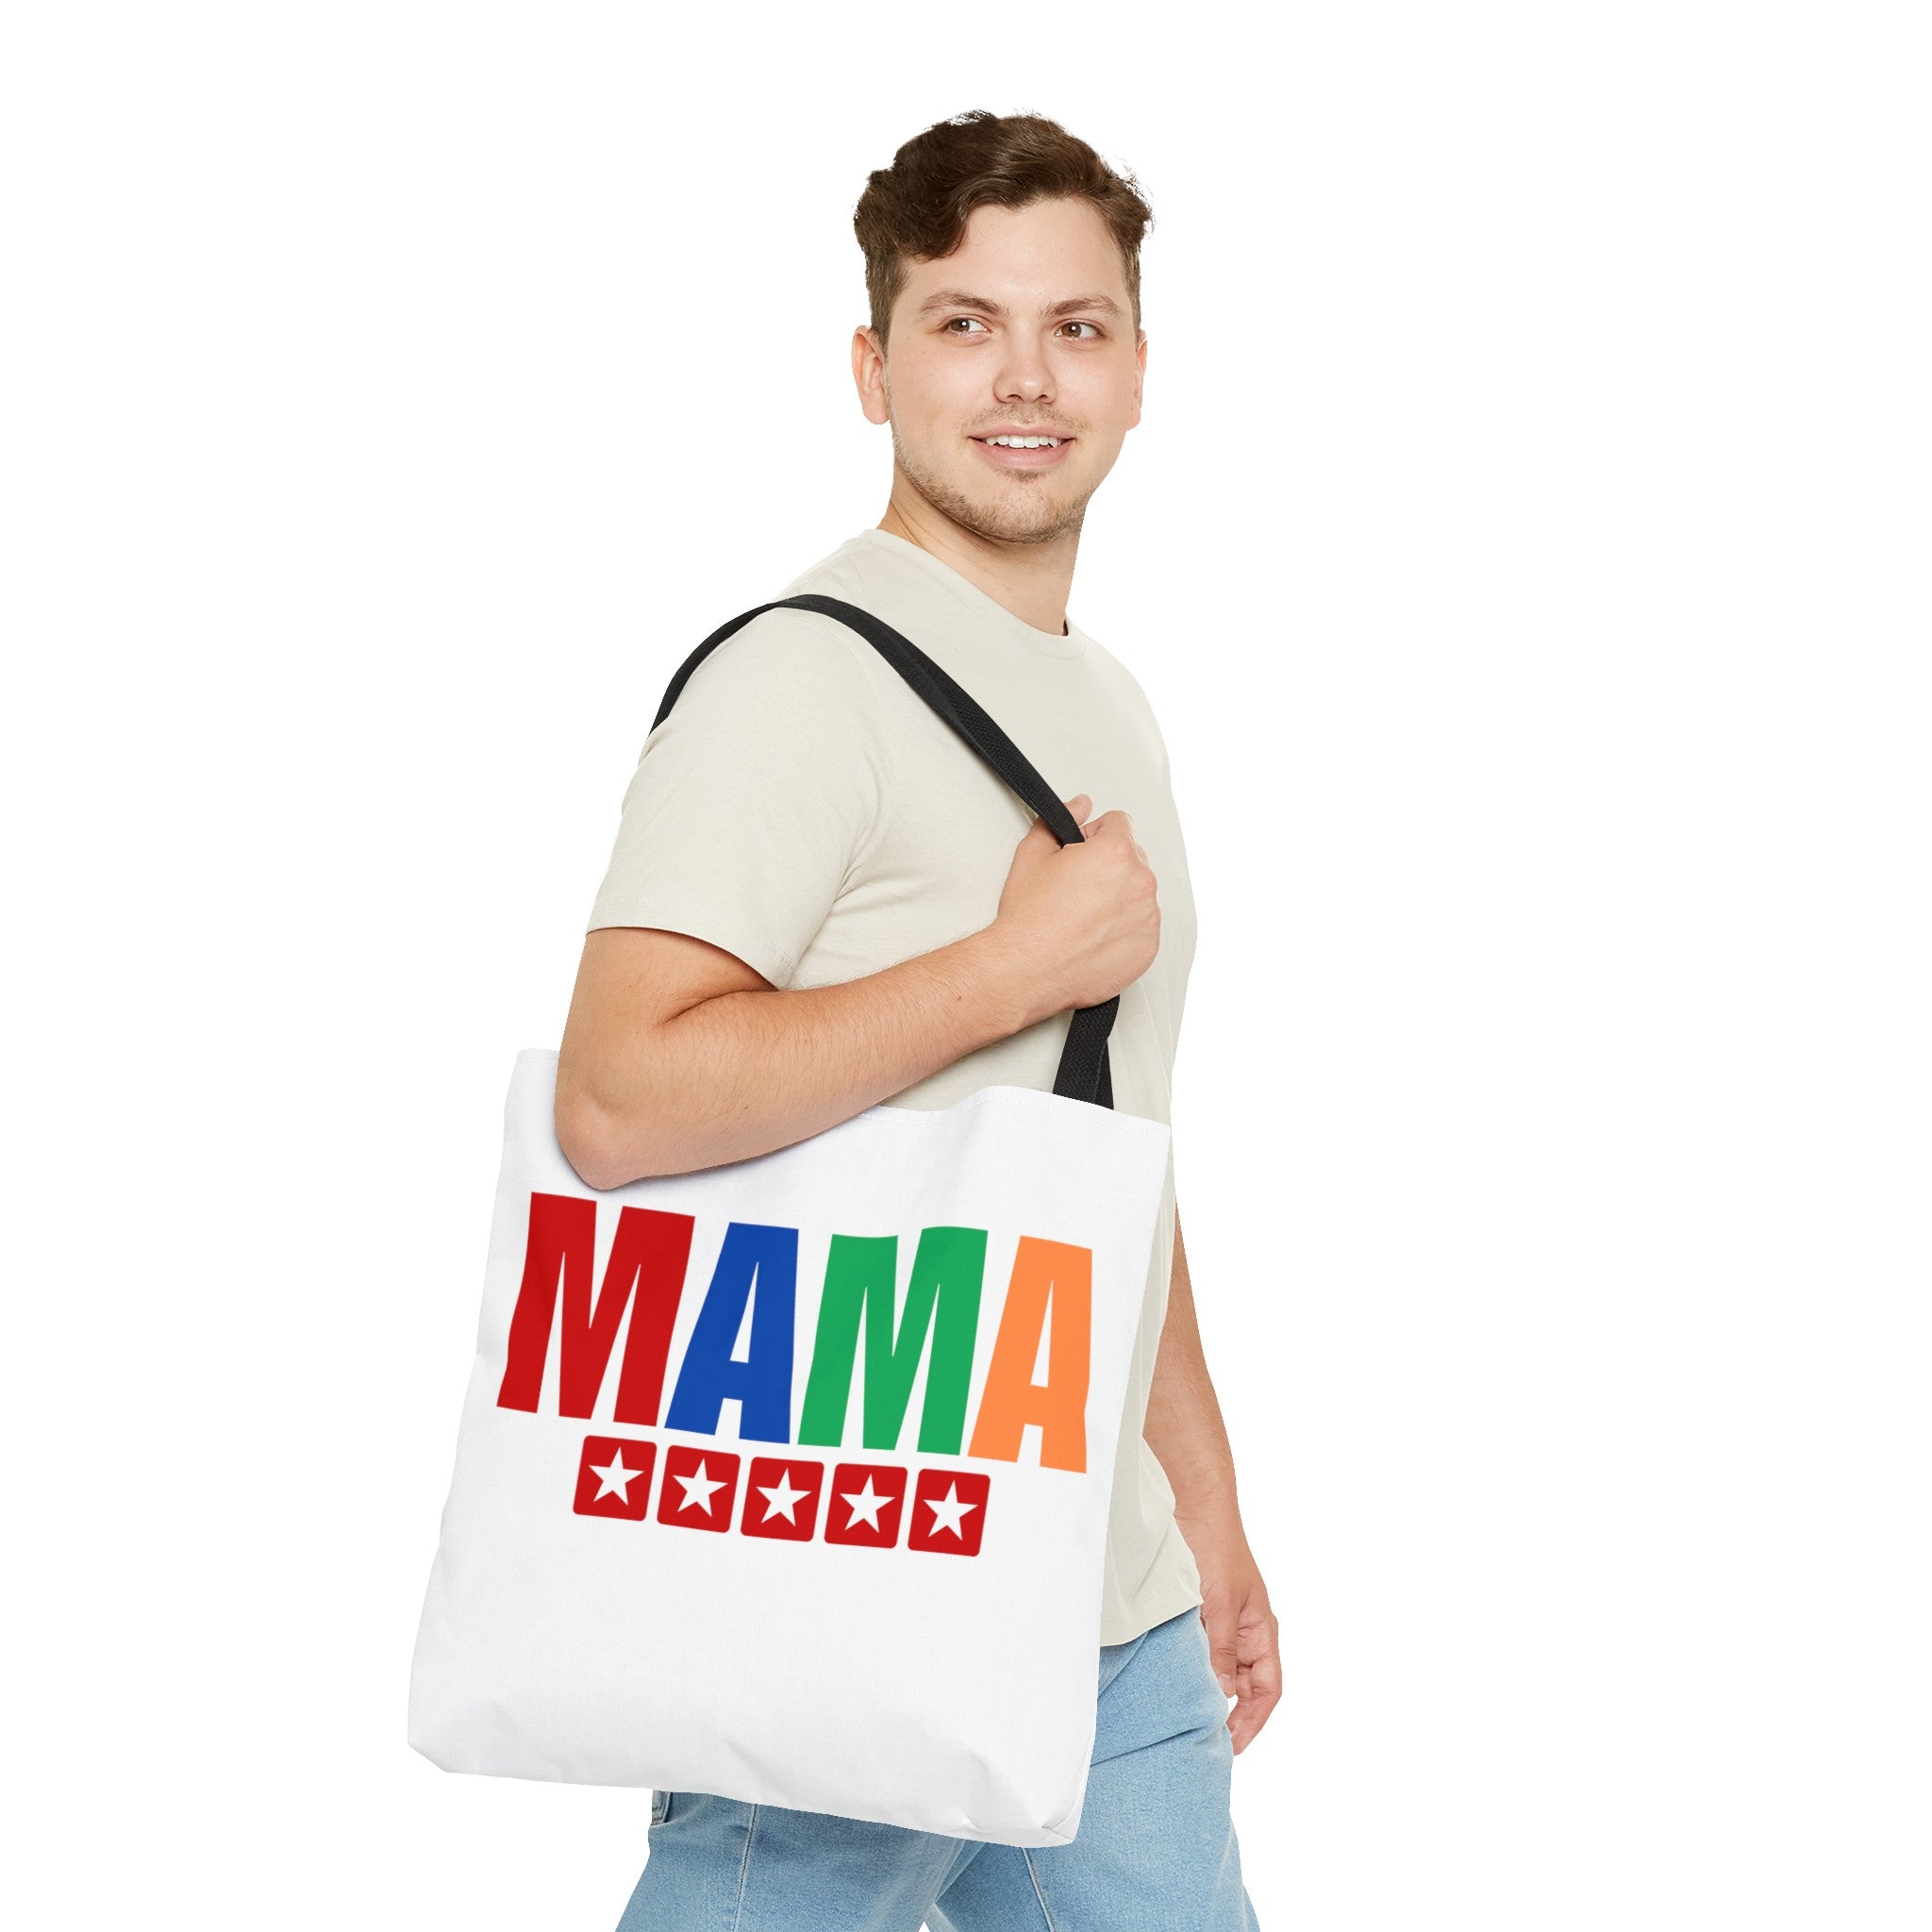 Mother's Day Gift Mama Five Star Tote Bag (AOP), Gift for Mama, Gift from Dad, Gift from Daughter, Gift from Son